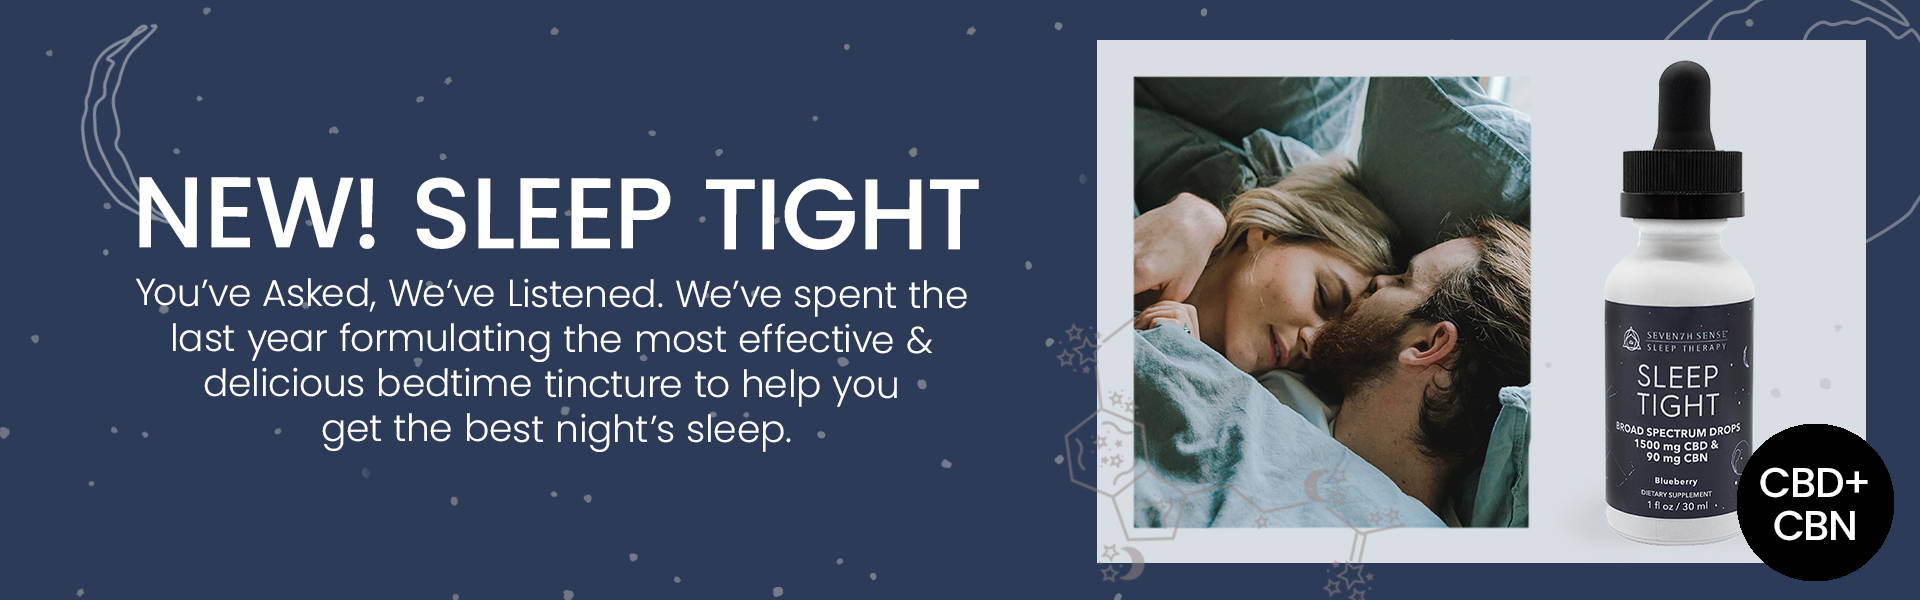 NEW! Sleep Tight. You’ve Asked, We’ve Listened. We’ve spent the last year  formulating the most effective & delicious bedtime  tincture to help you get the best night’s sleep.